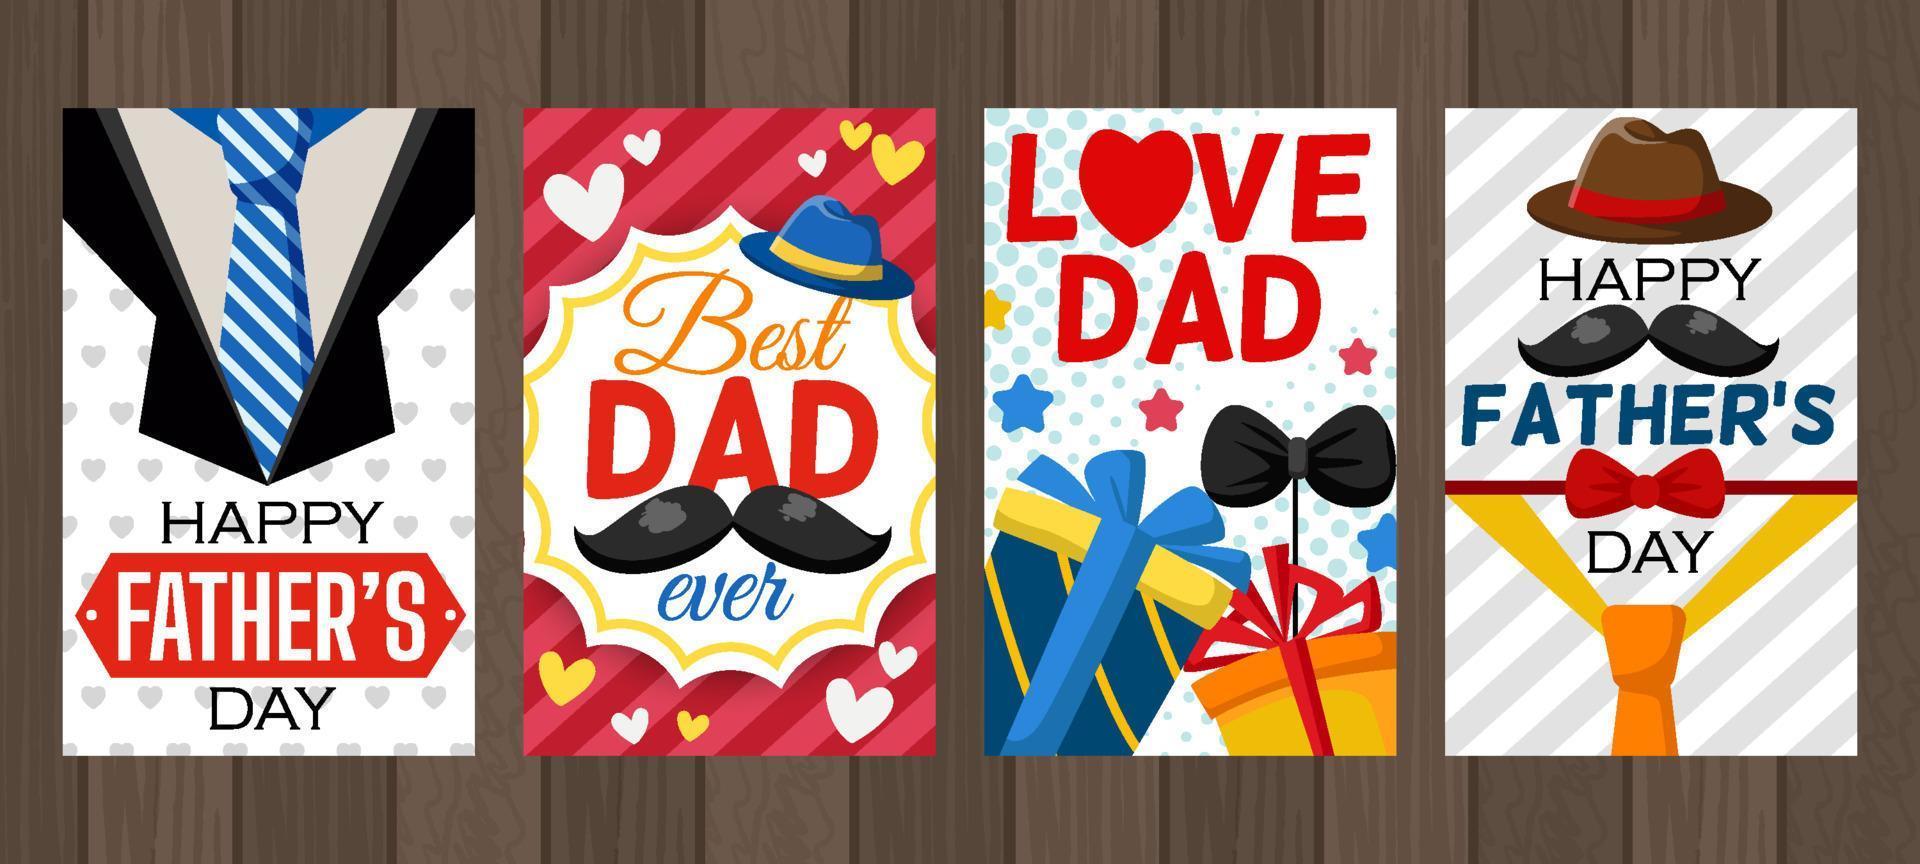 Happy Father's Day Card vector